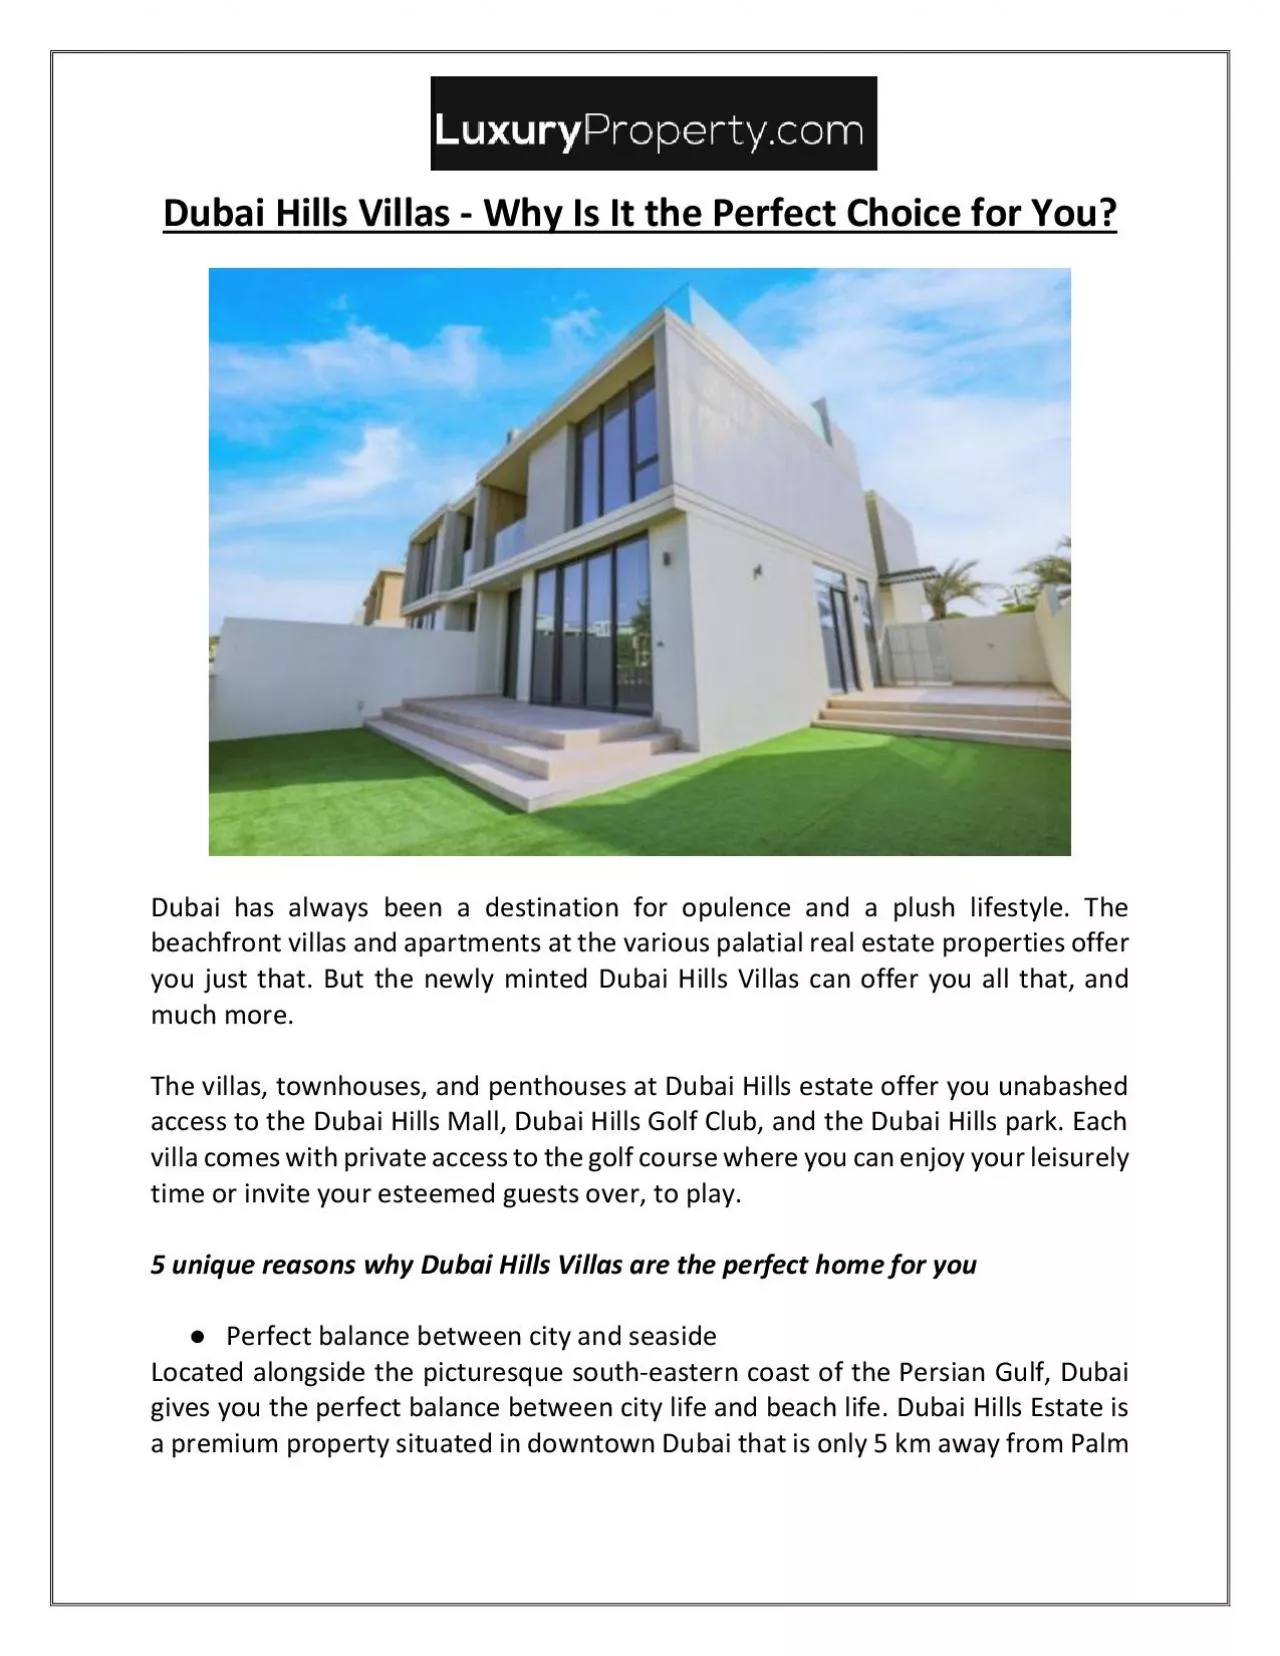 Dubai Hills Villas - Why Is It the Perfect Choice for You?